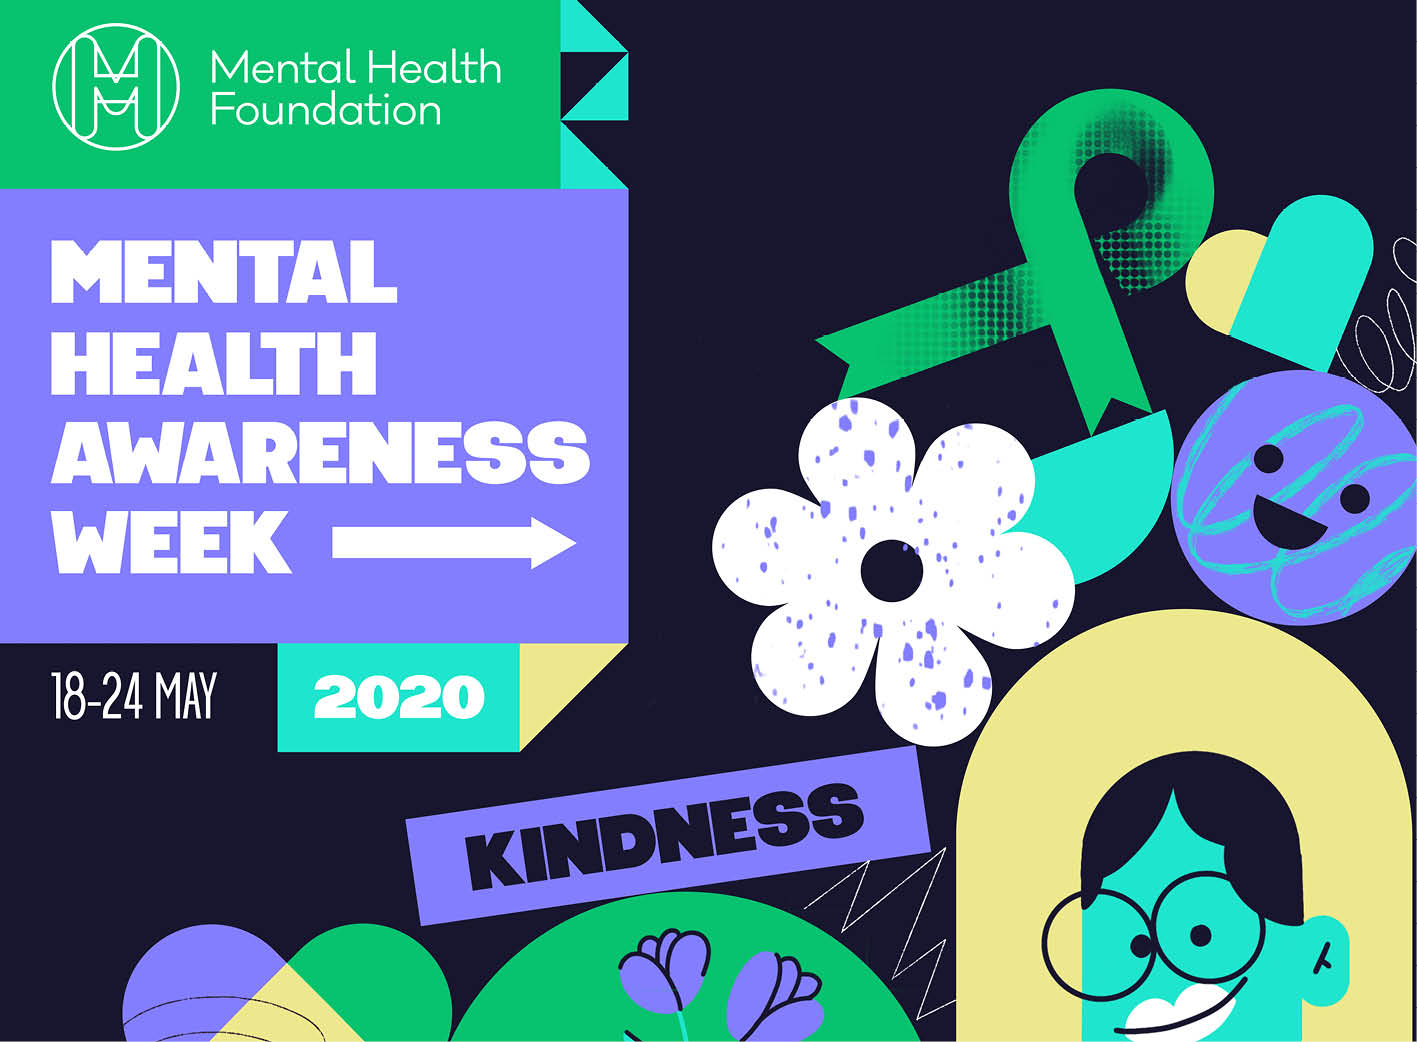 Getting involved this Mental Health Awareness Week